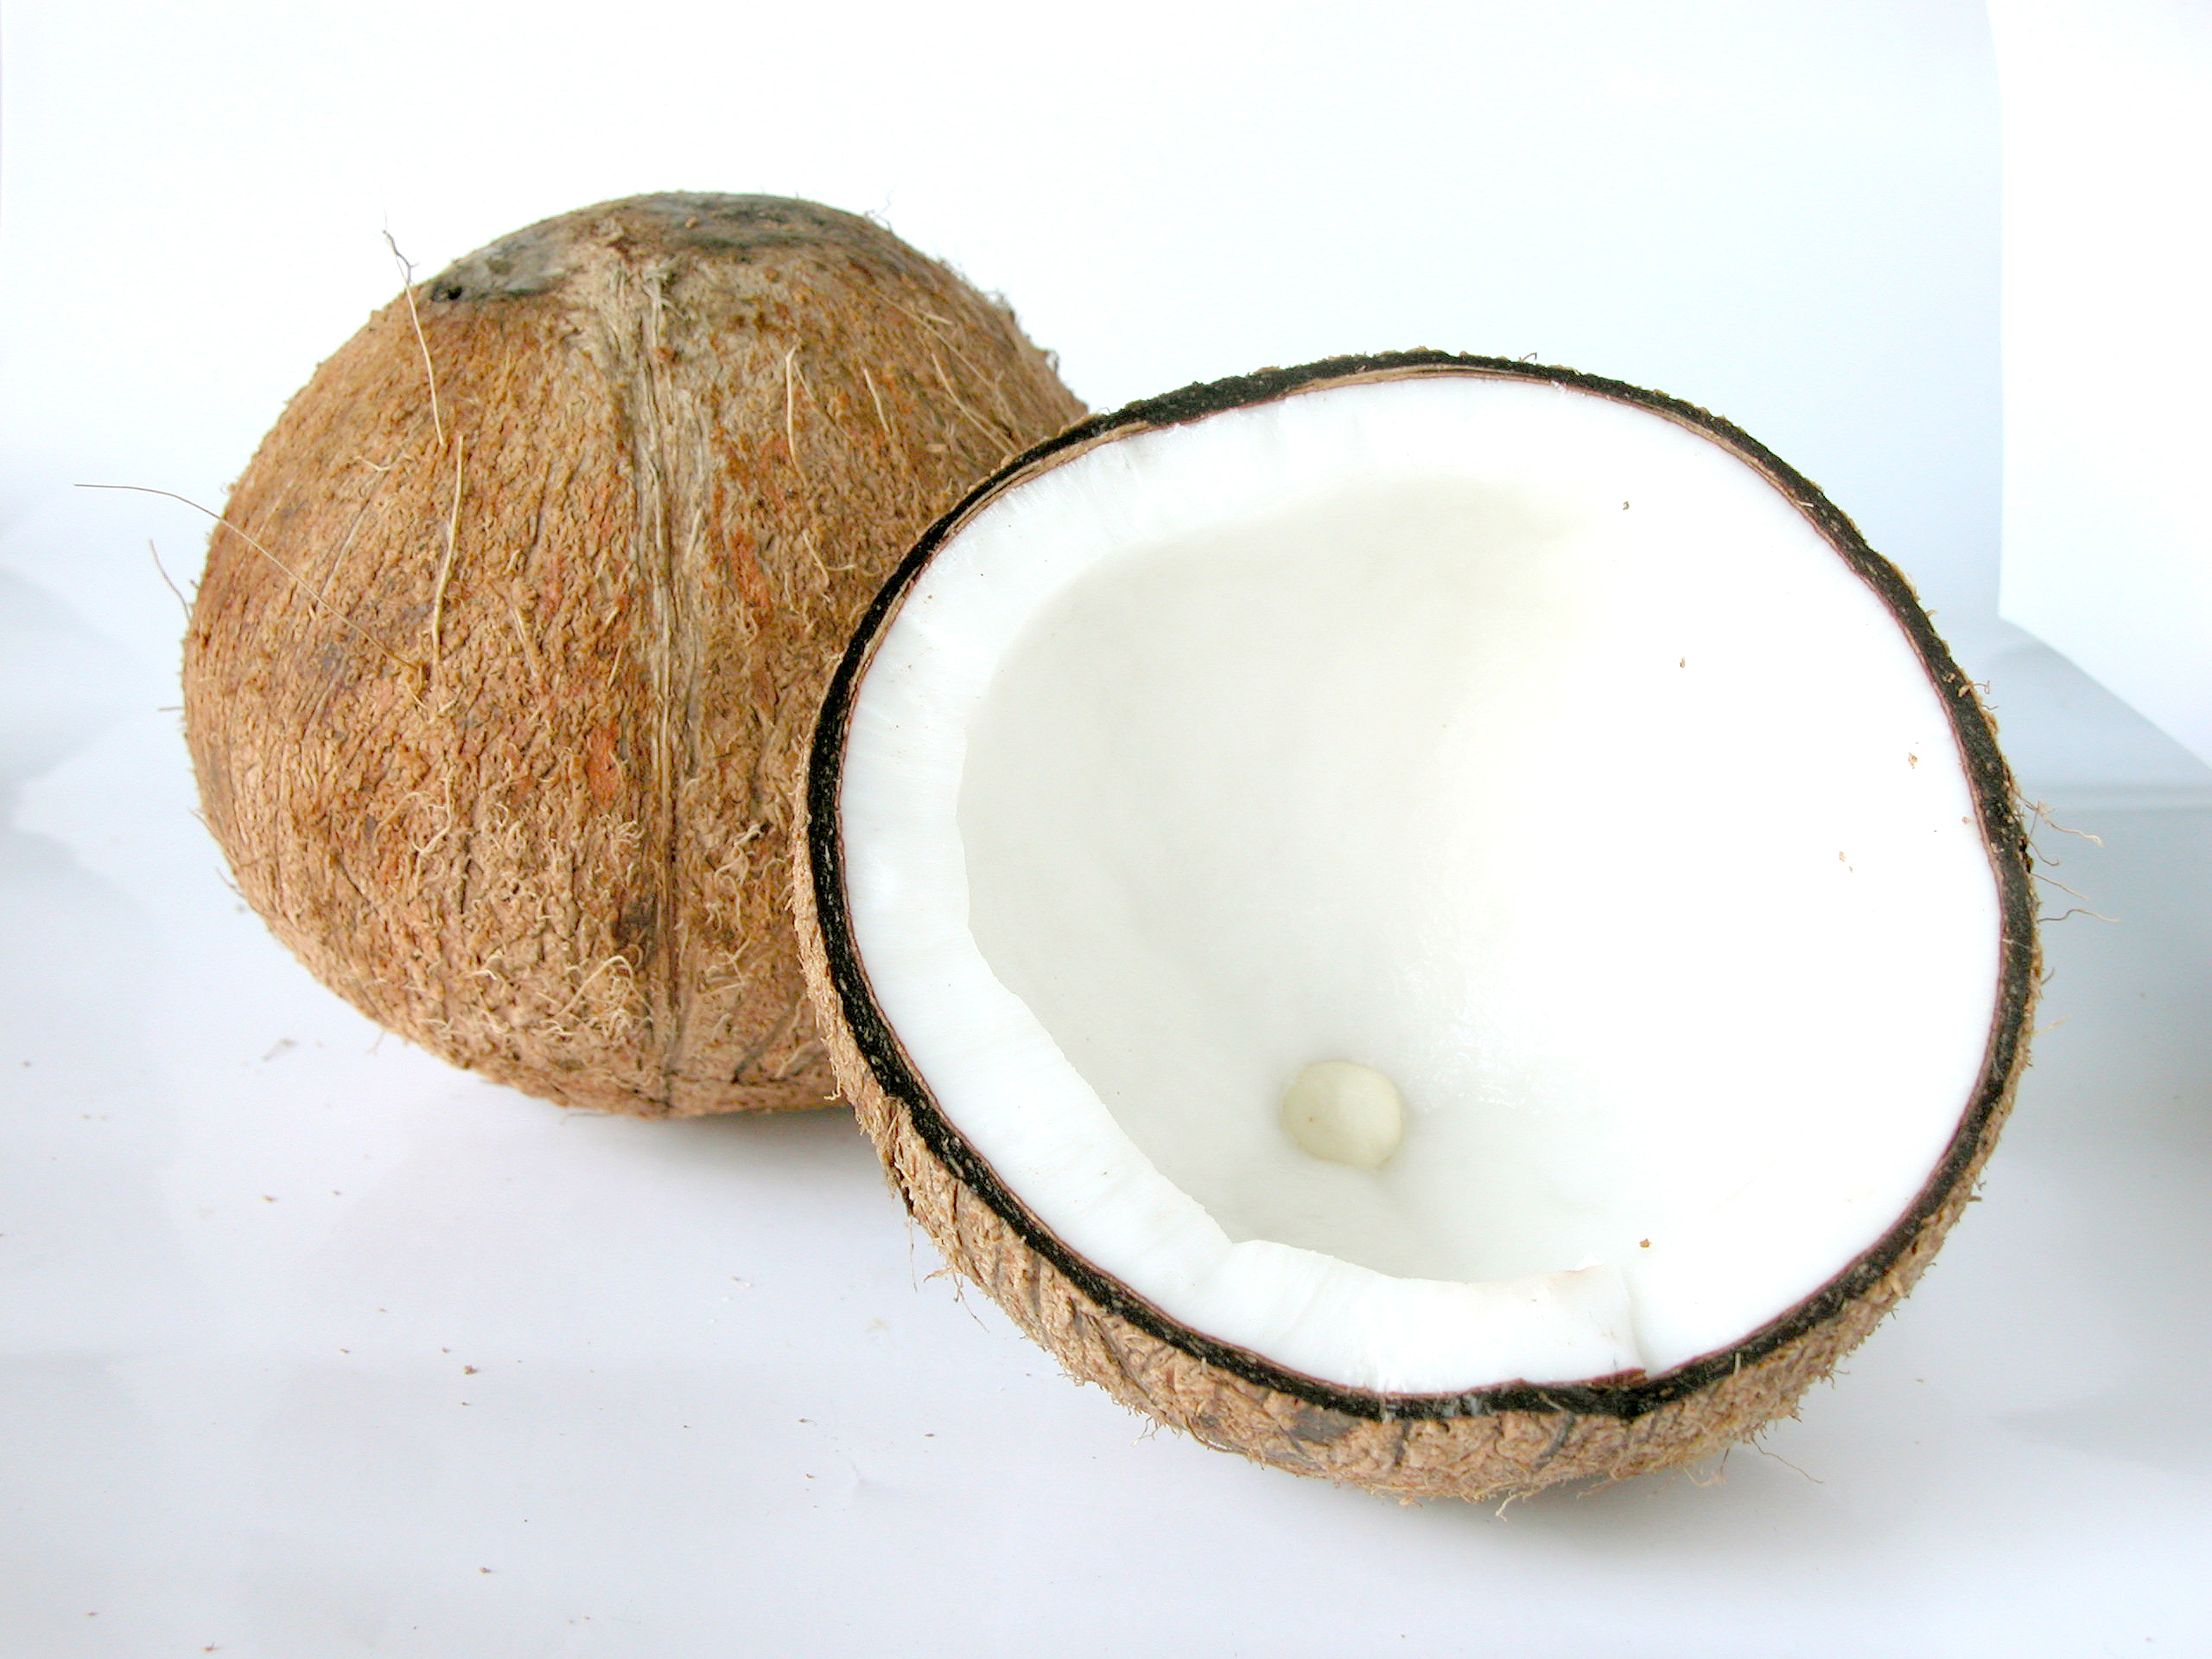 30 Ways to Use Coconut Oil for Humans and Animals! | Blog | PETA Latino